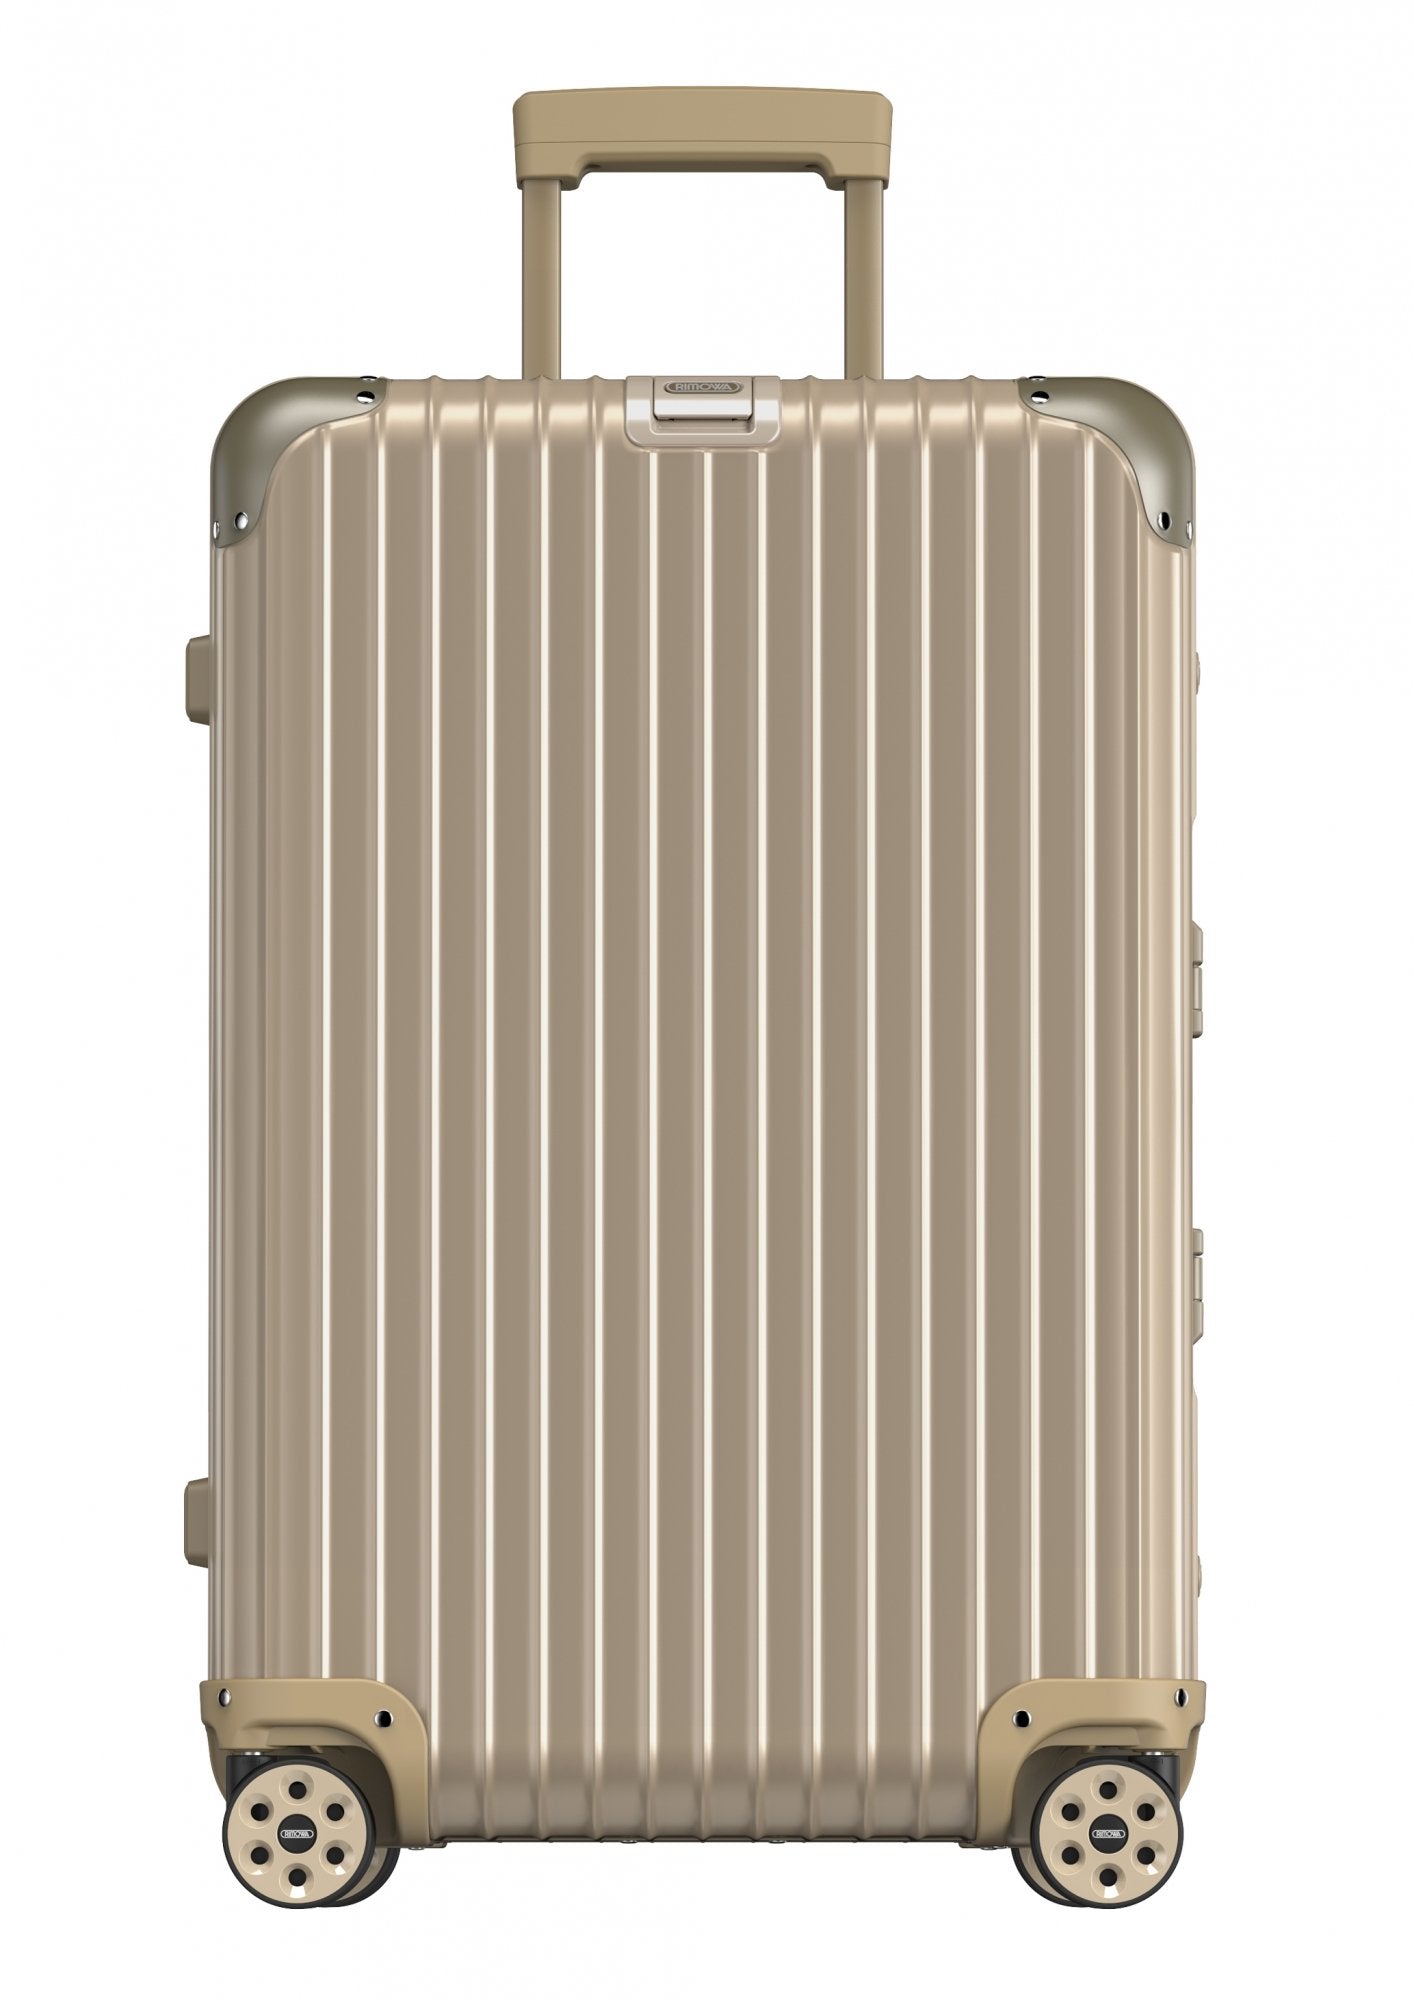 Rimowa's Latest Colors Make Us Want to Shop for Luggage Again